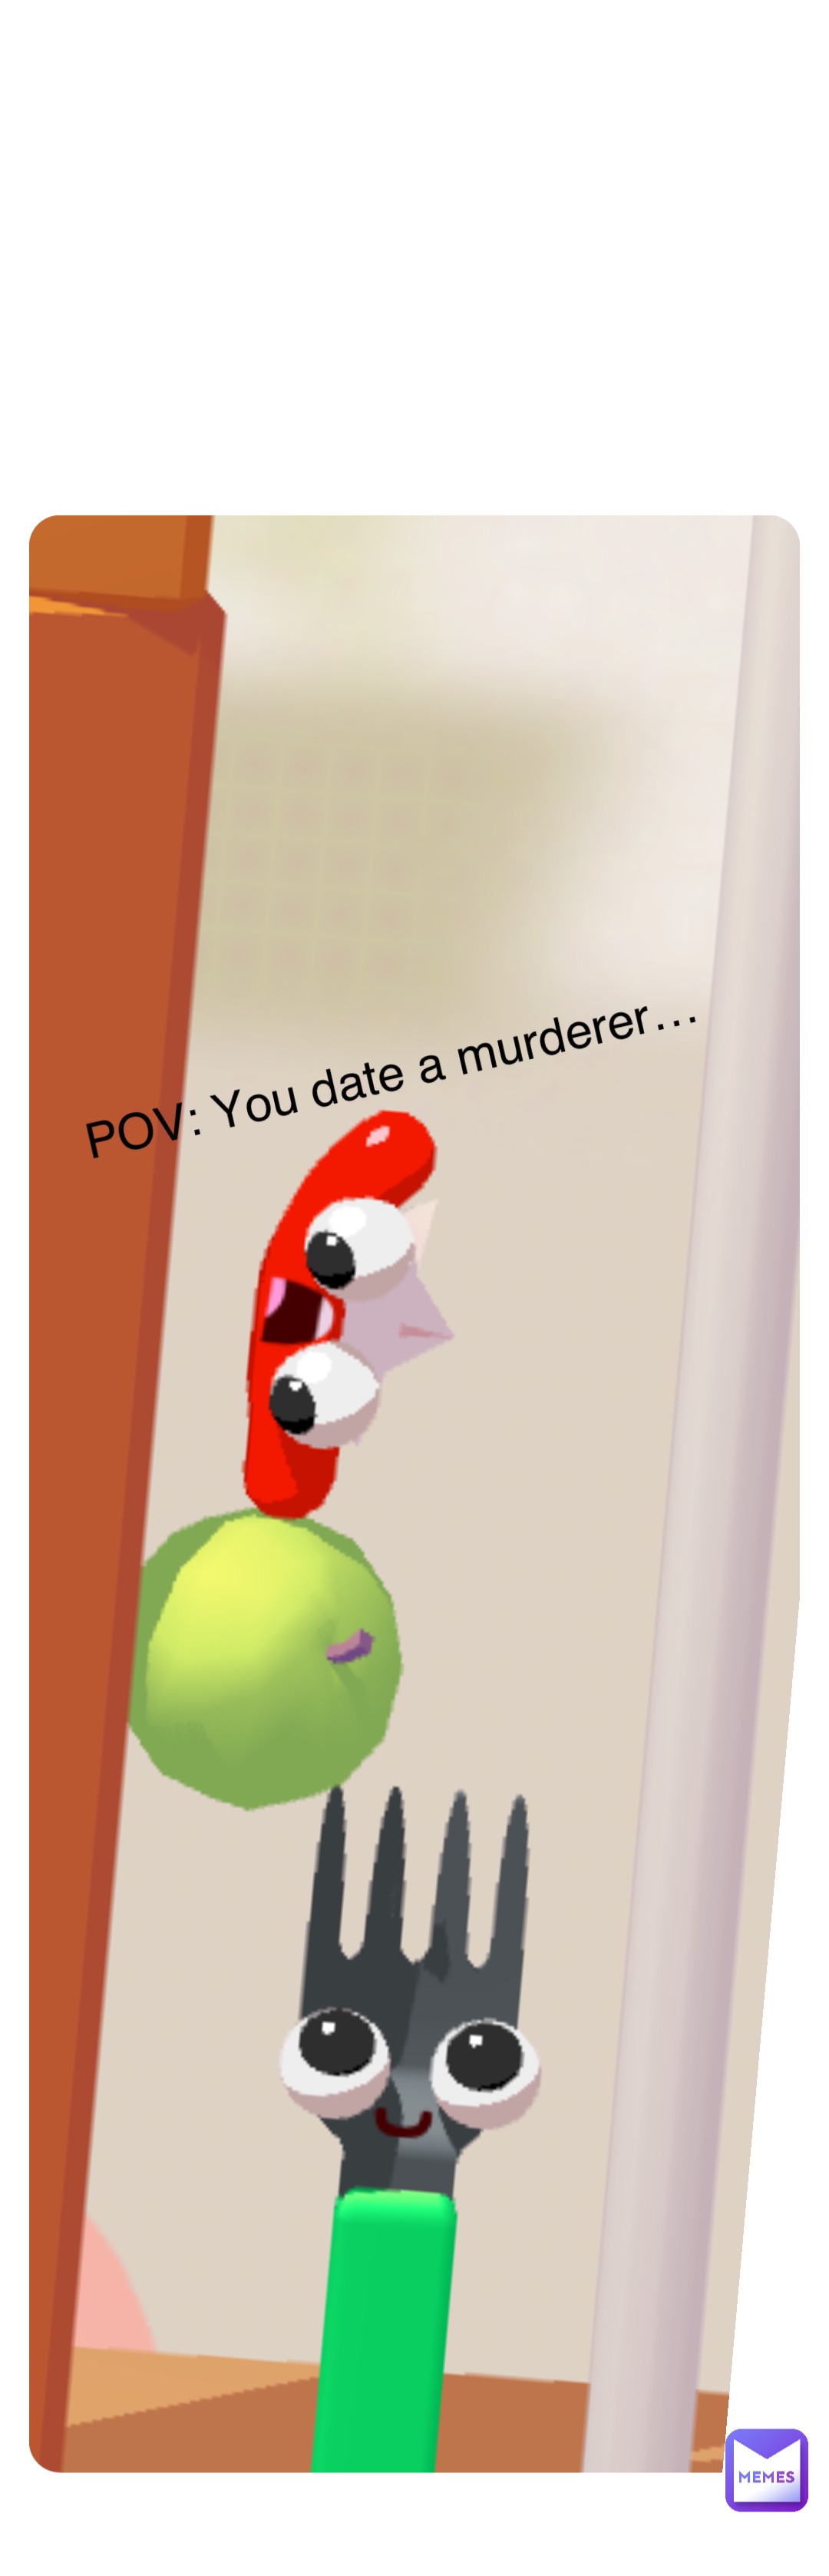 Double tap to edit POV: You date a murderer…